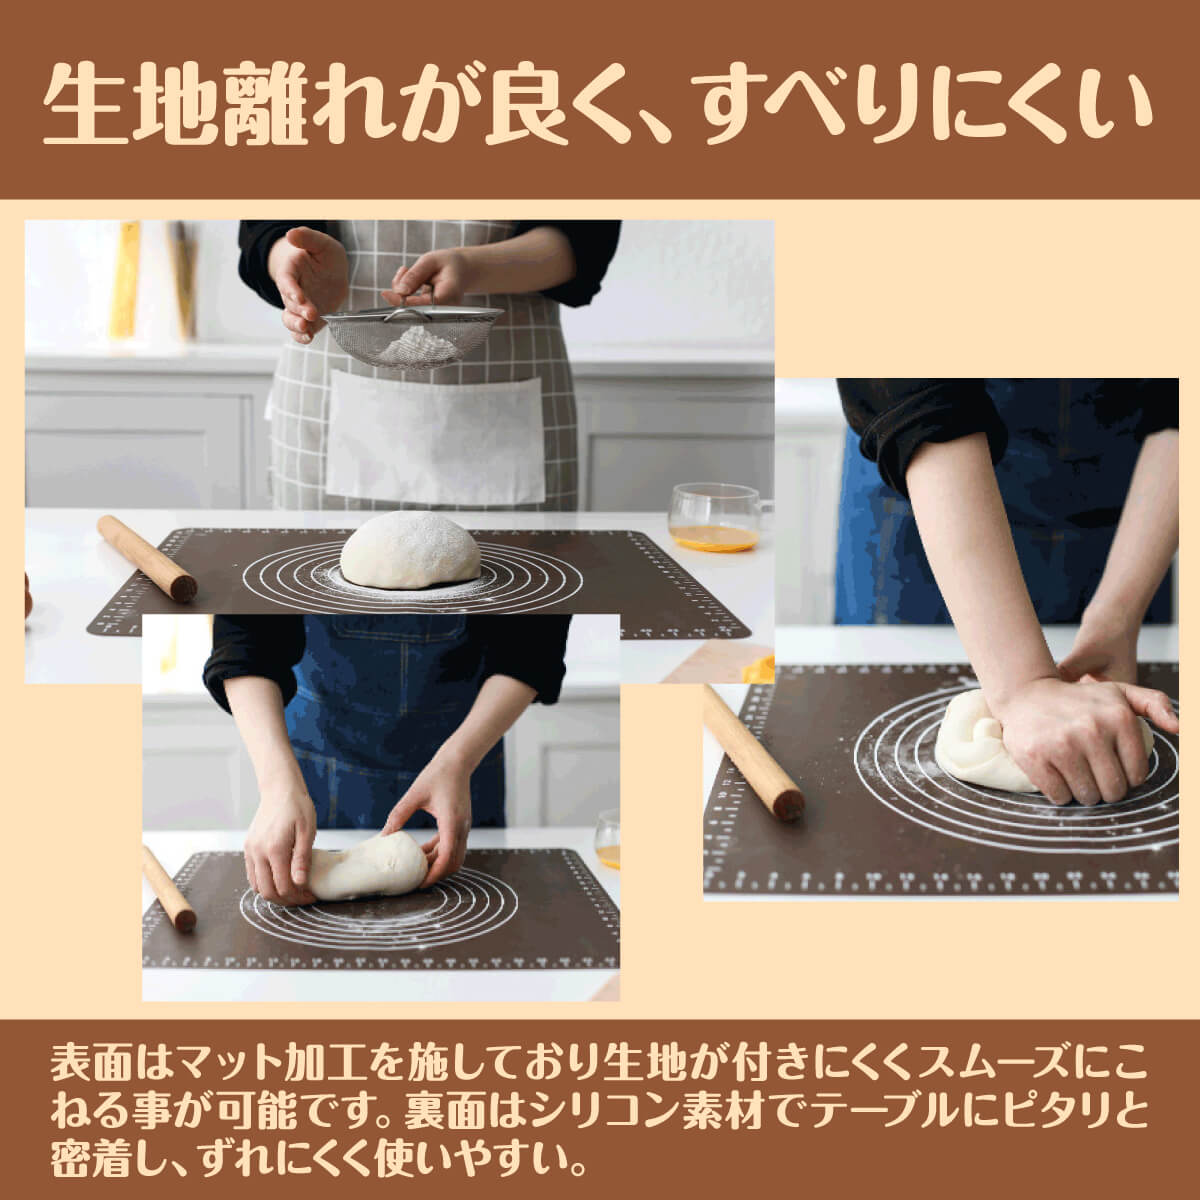  cooking mat silicon large size bread mat beige ka Lee mat silicon bread making confection making confectionery mat breadmaking rolling board 